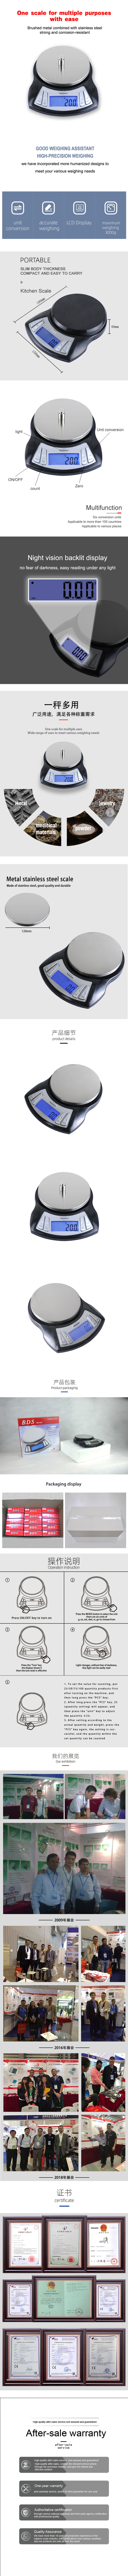 BDS-CX| Kitchen scale Kitchen Electronic Scale Portable Kitchen digital scale Food weighing scale BDS-CX| Kitchen scale Kitchen Electronic Scale Portable Kitchen digital scale Food weighing scale Portable Kitchen digital scale,Food weighing scale,Kitchen Electronic Scale,Kitchen scale